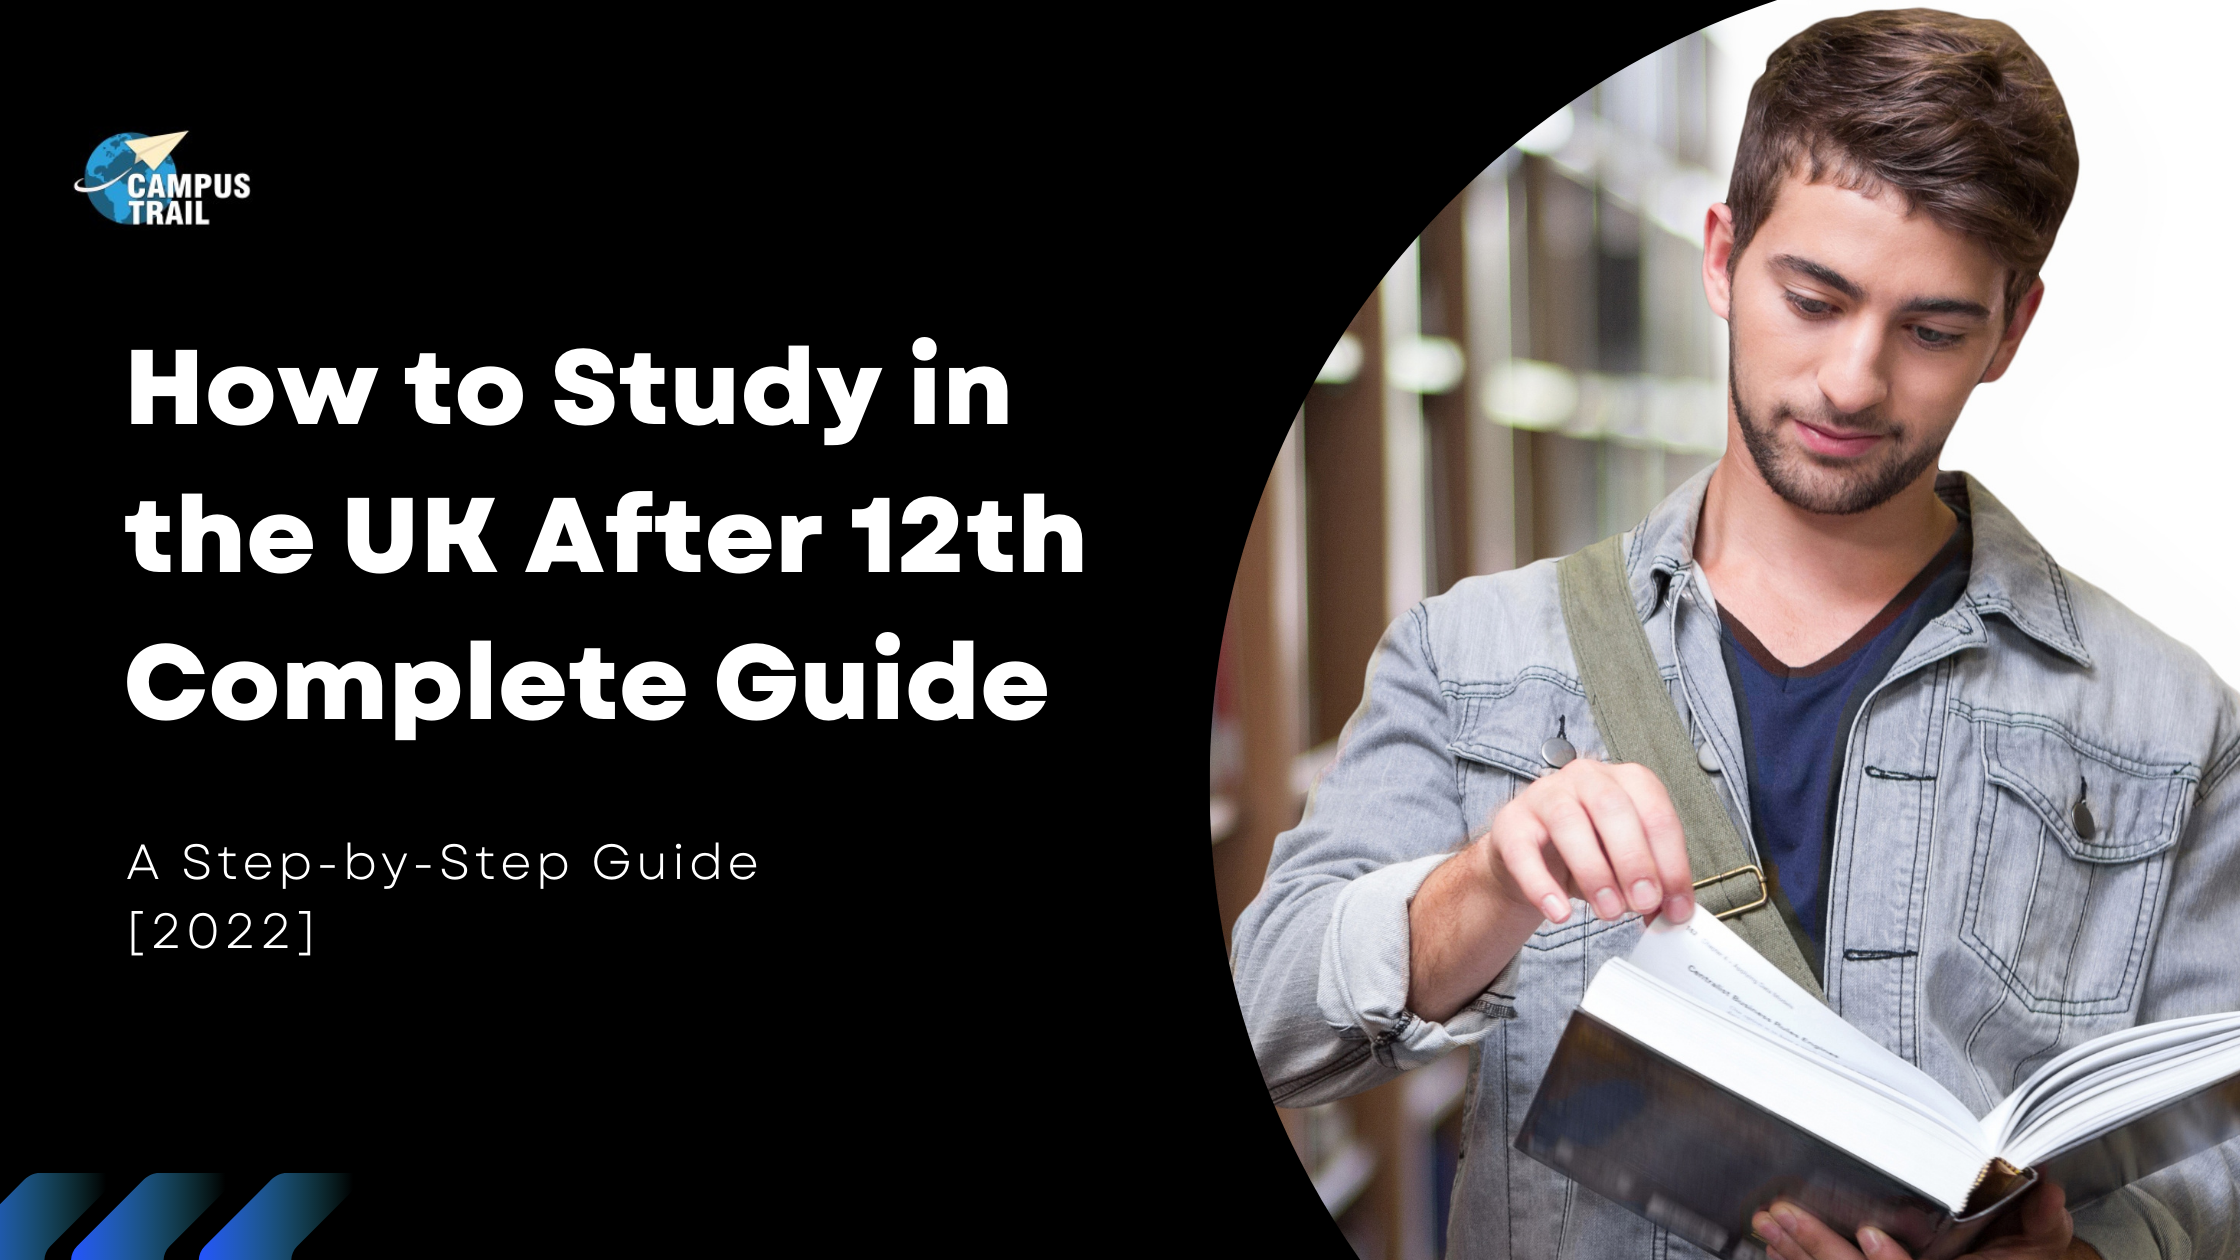 How to Study in the UK After 12th Complete Guide